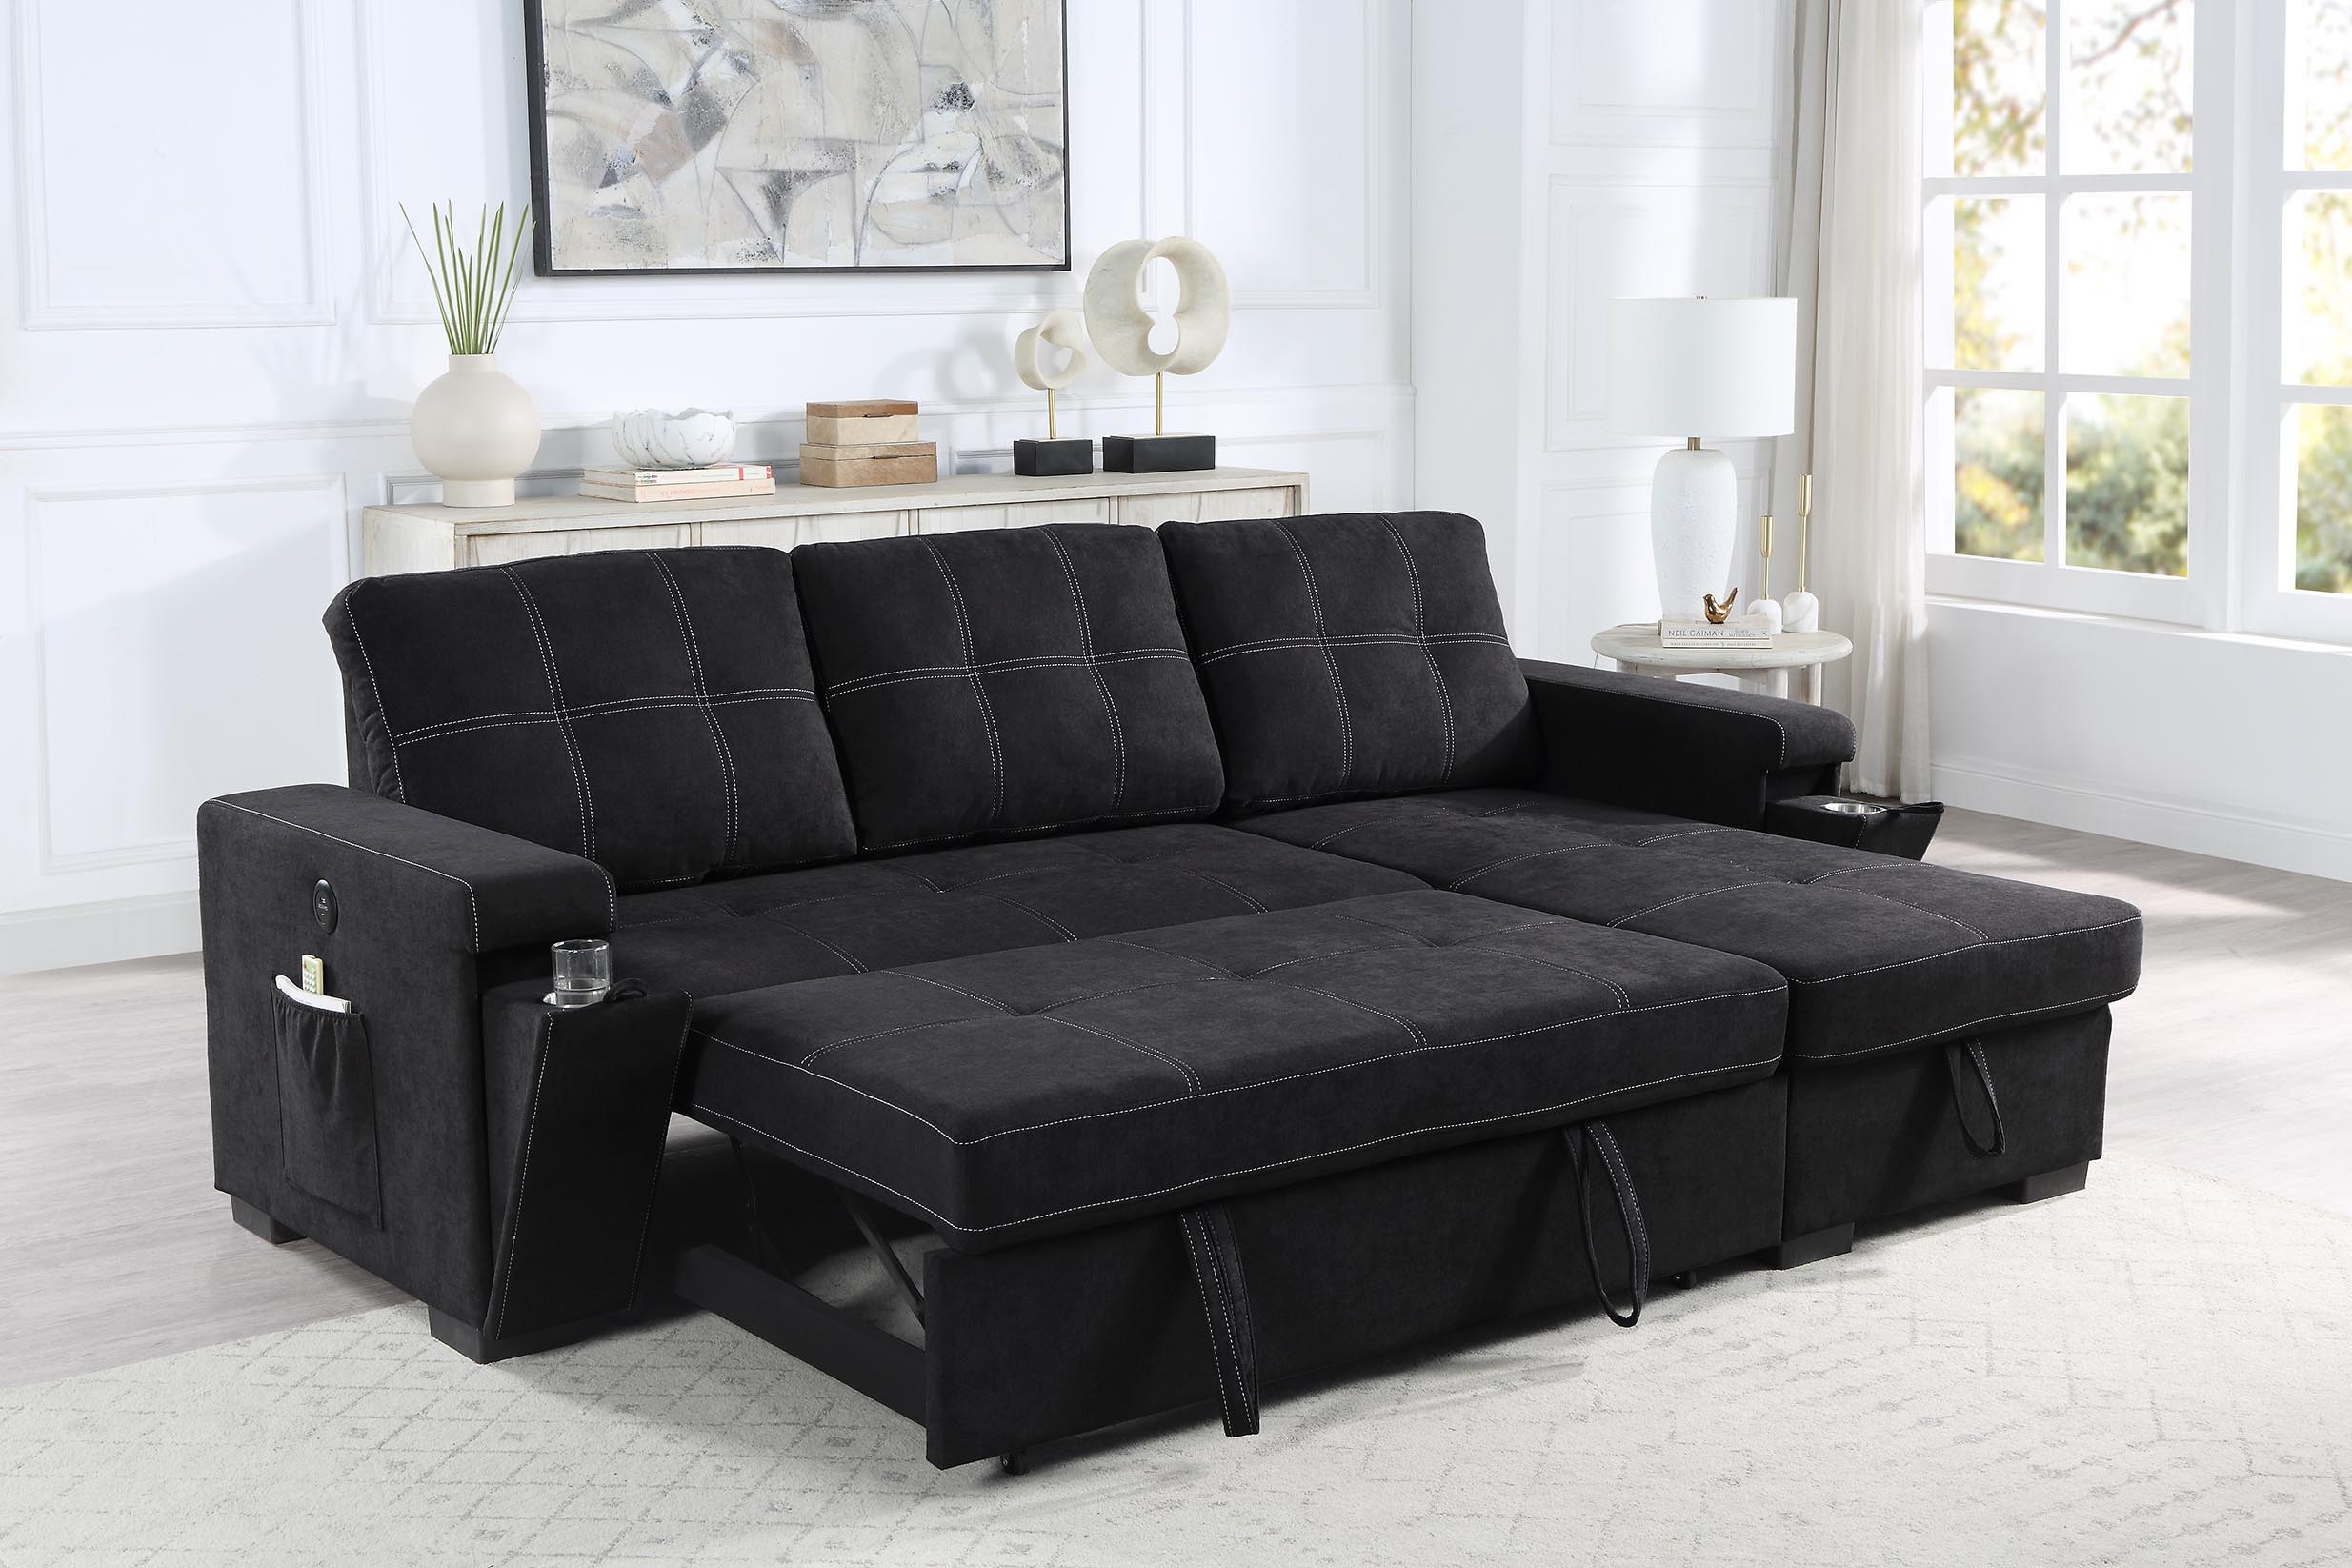 Toby - Woven Fabric Reversible Sleeper Sectional Sofa With Storage Chaise Cup Holder Charging Ports And Pockets